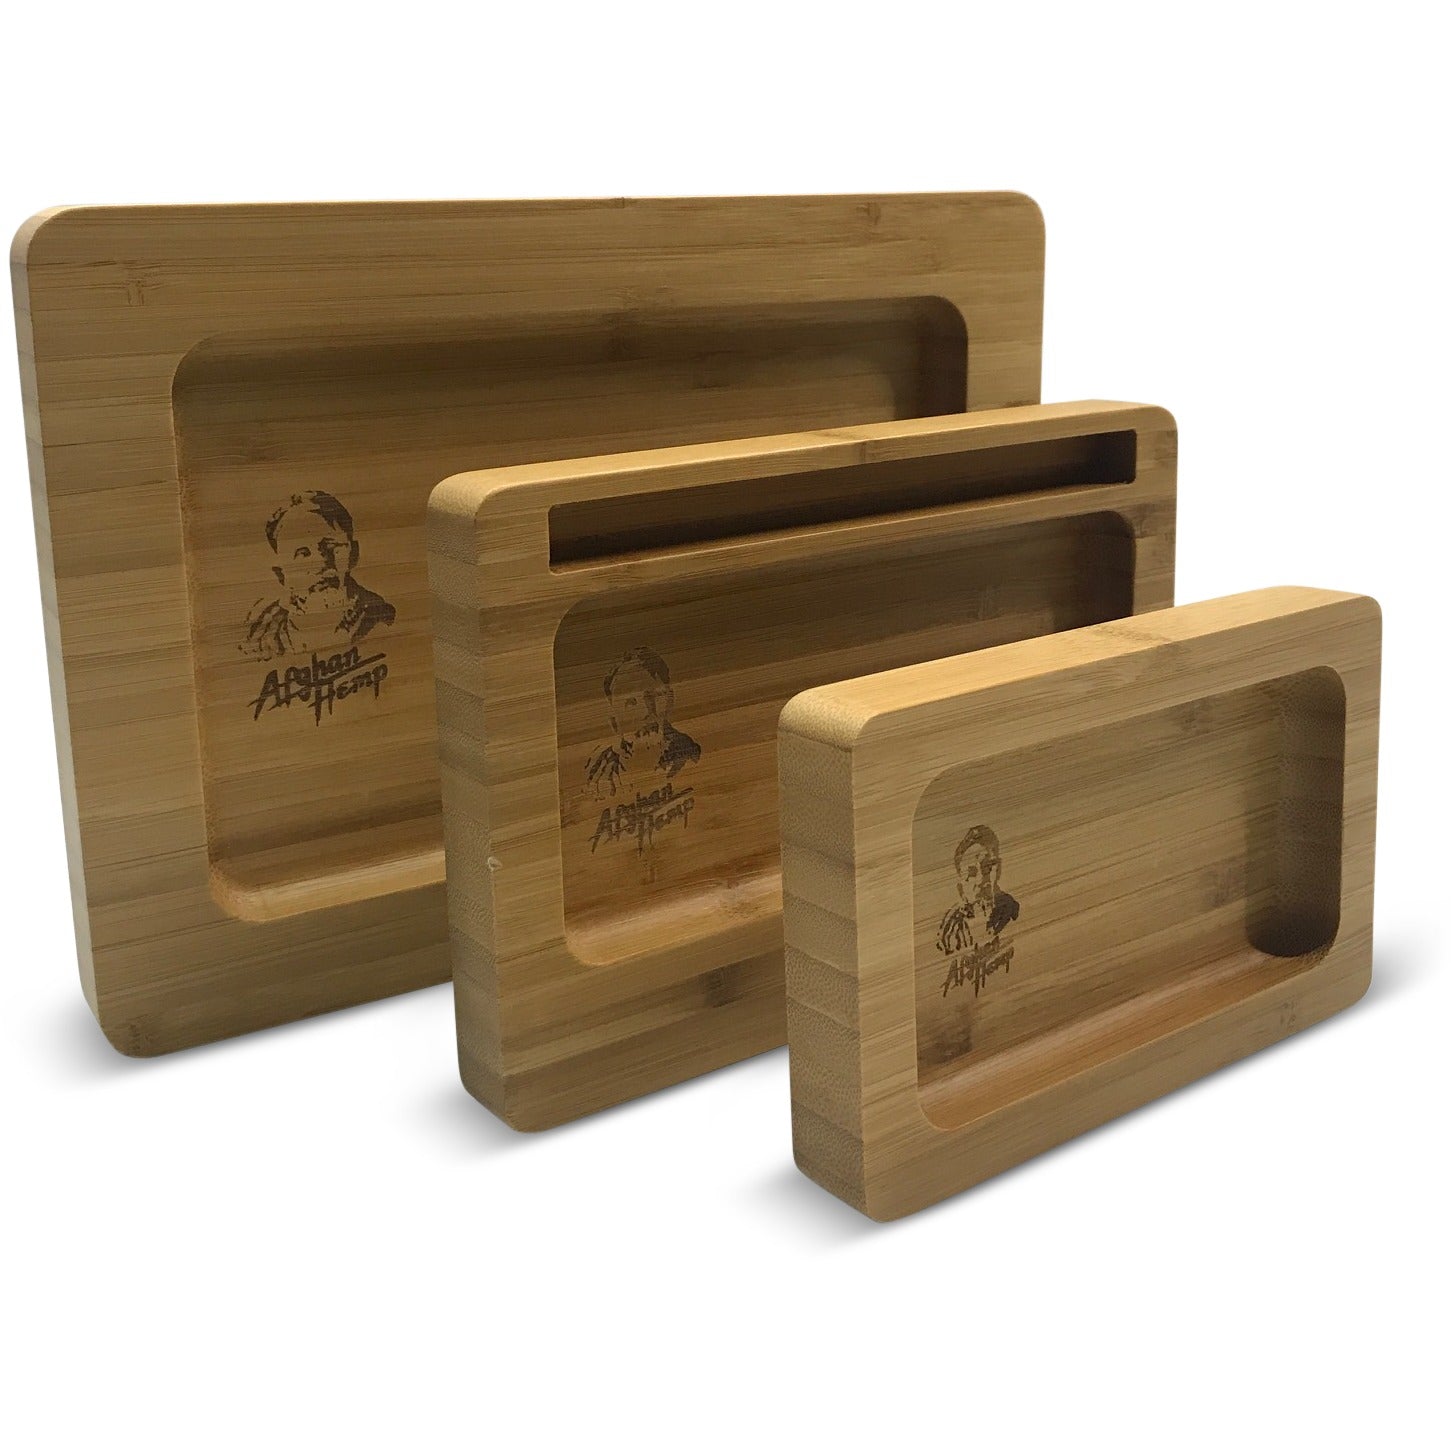 Never Lose A Crumb Of Bud With The Afghan Hemp Wooden Rolling Tray